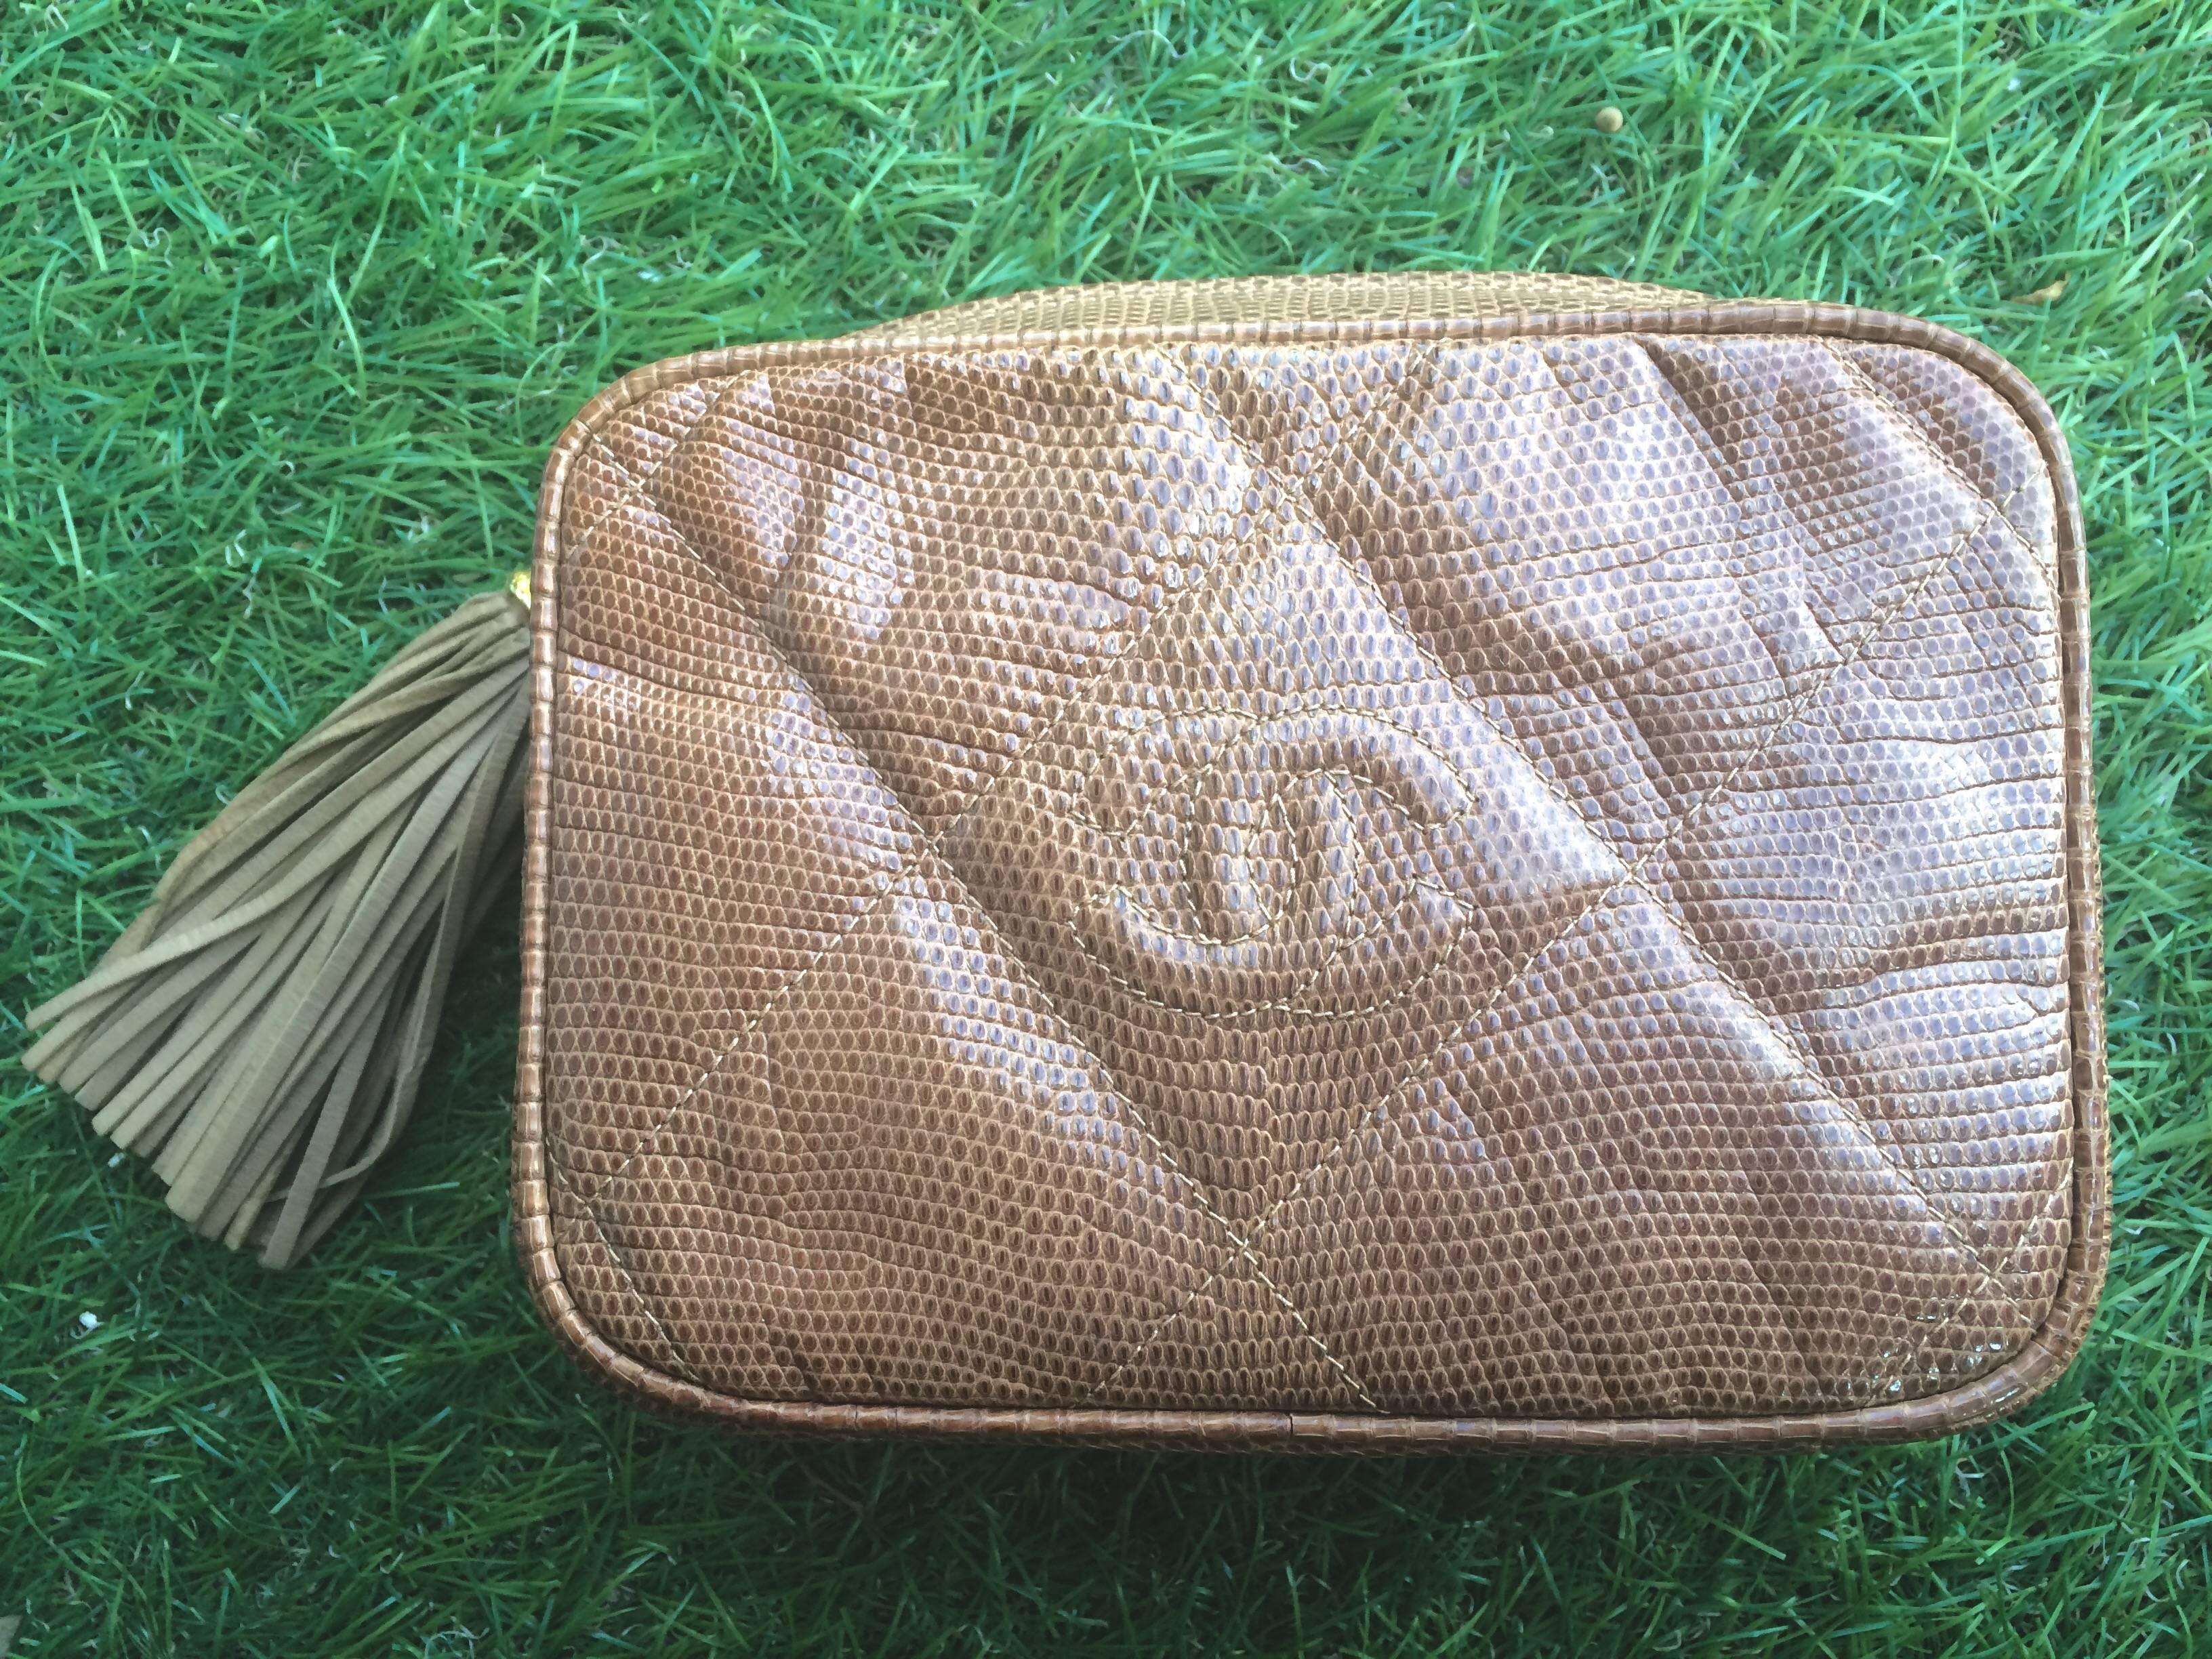 1980s. Vintage CHANEL cocoa brown lizard camera bag type clutch bag with fringe and CC mark.

Here is another fabulous purse from CHANEL back in the 80's.
Beautiful genuine cocoa brown lizard leather clutch/pouch bag.

Featuring a tassel/fringe to